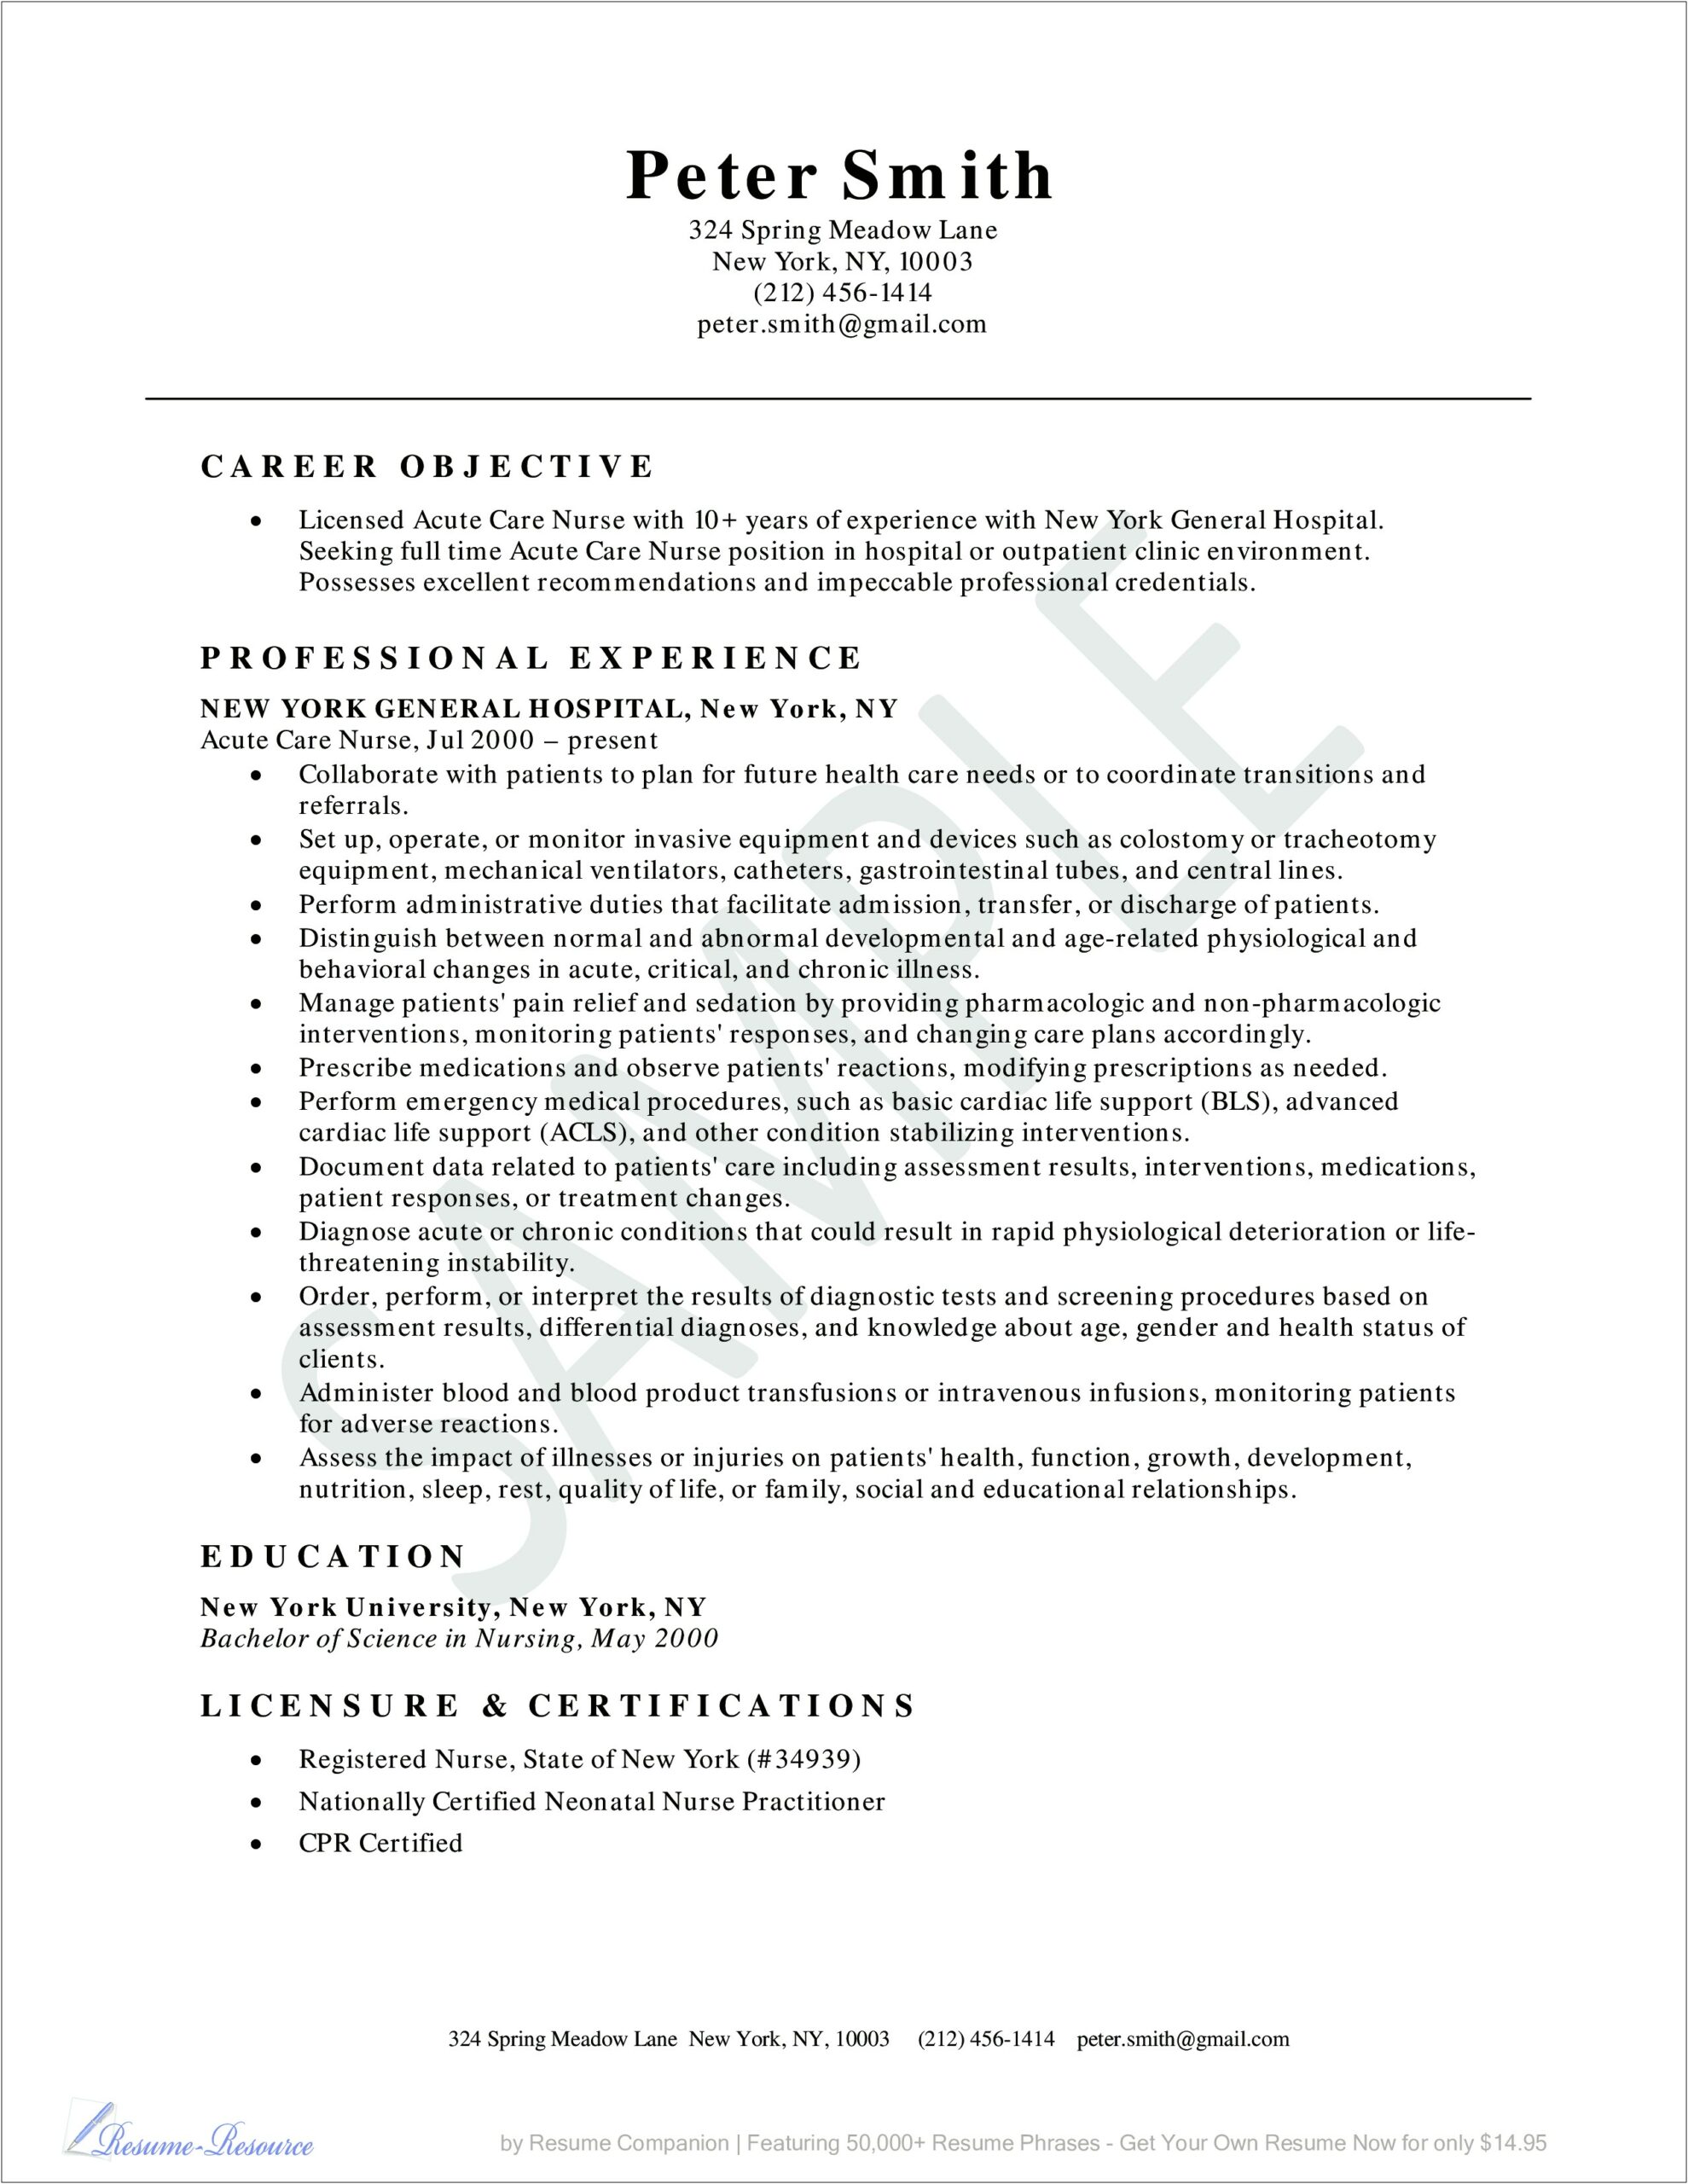 Resume Wording For Objective In Medical Field